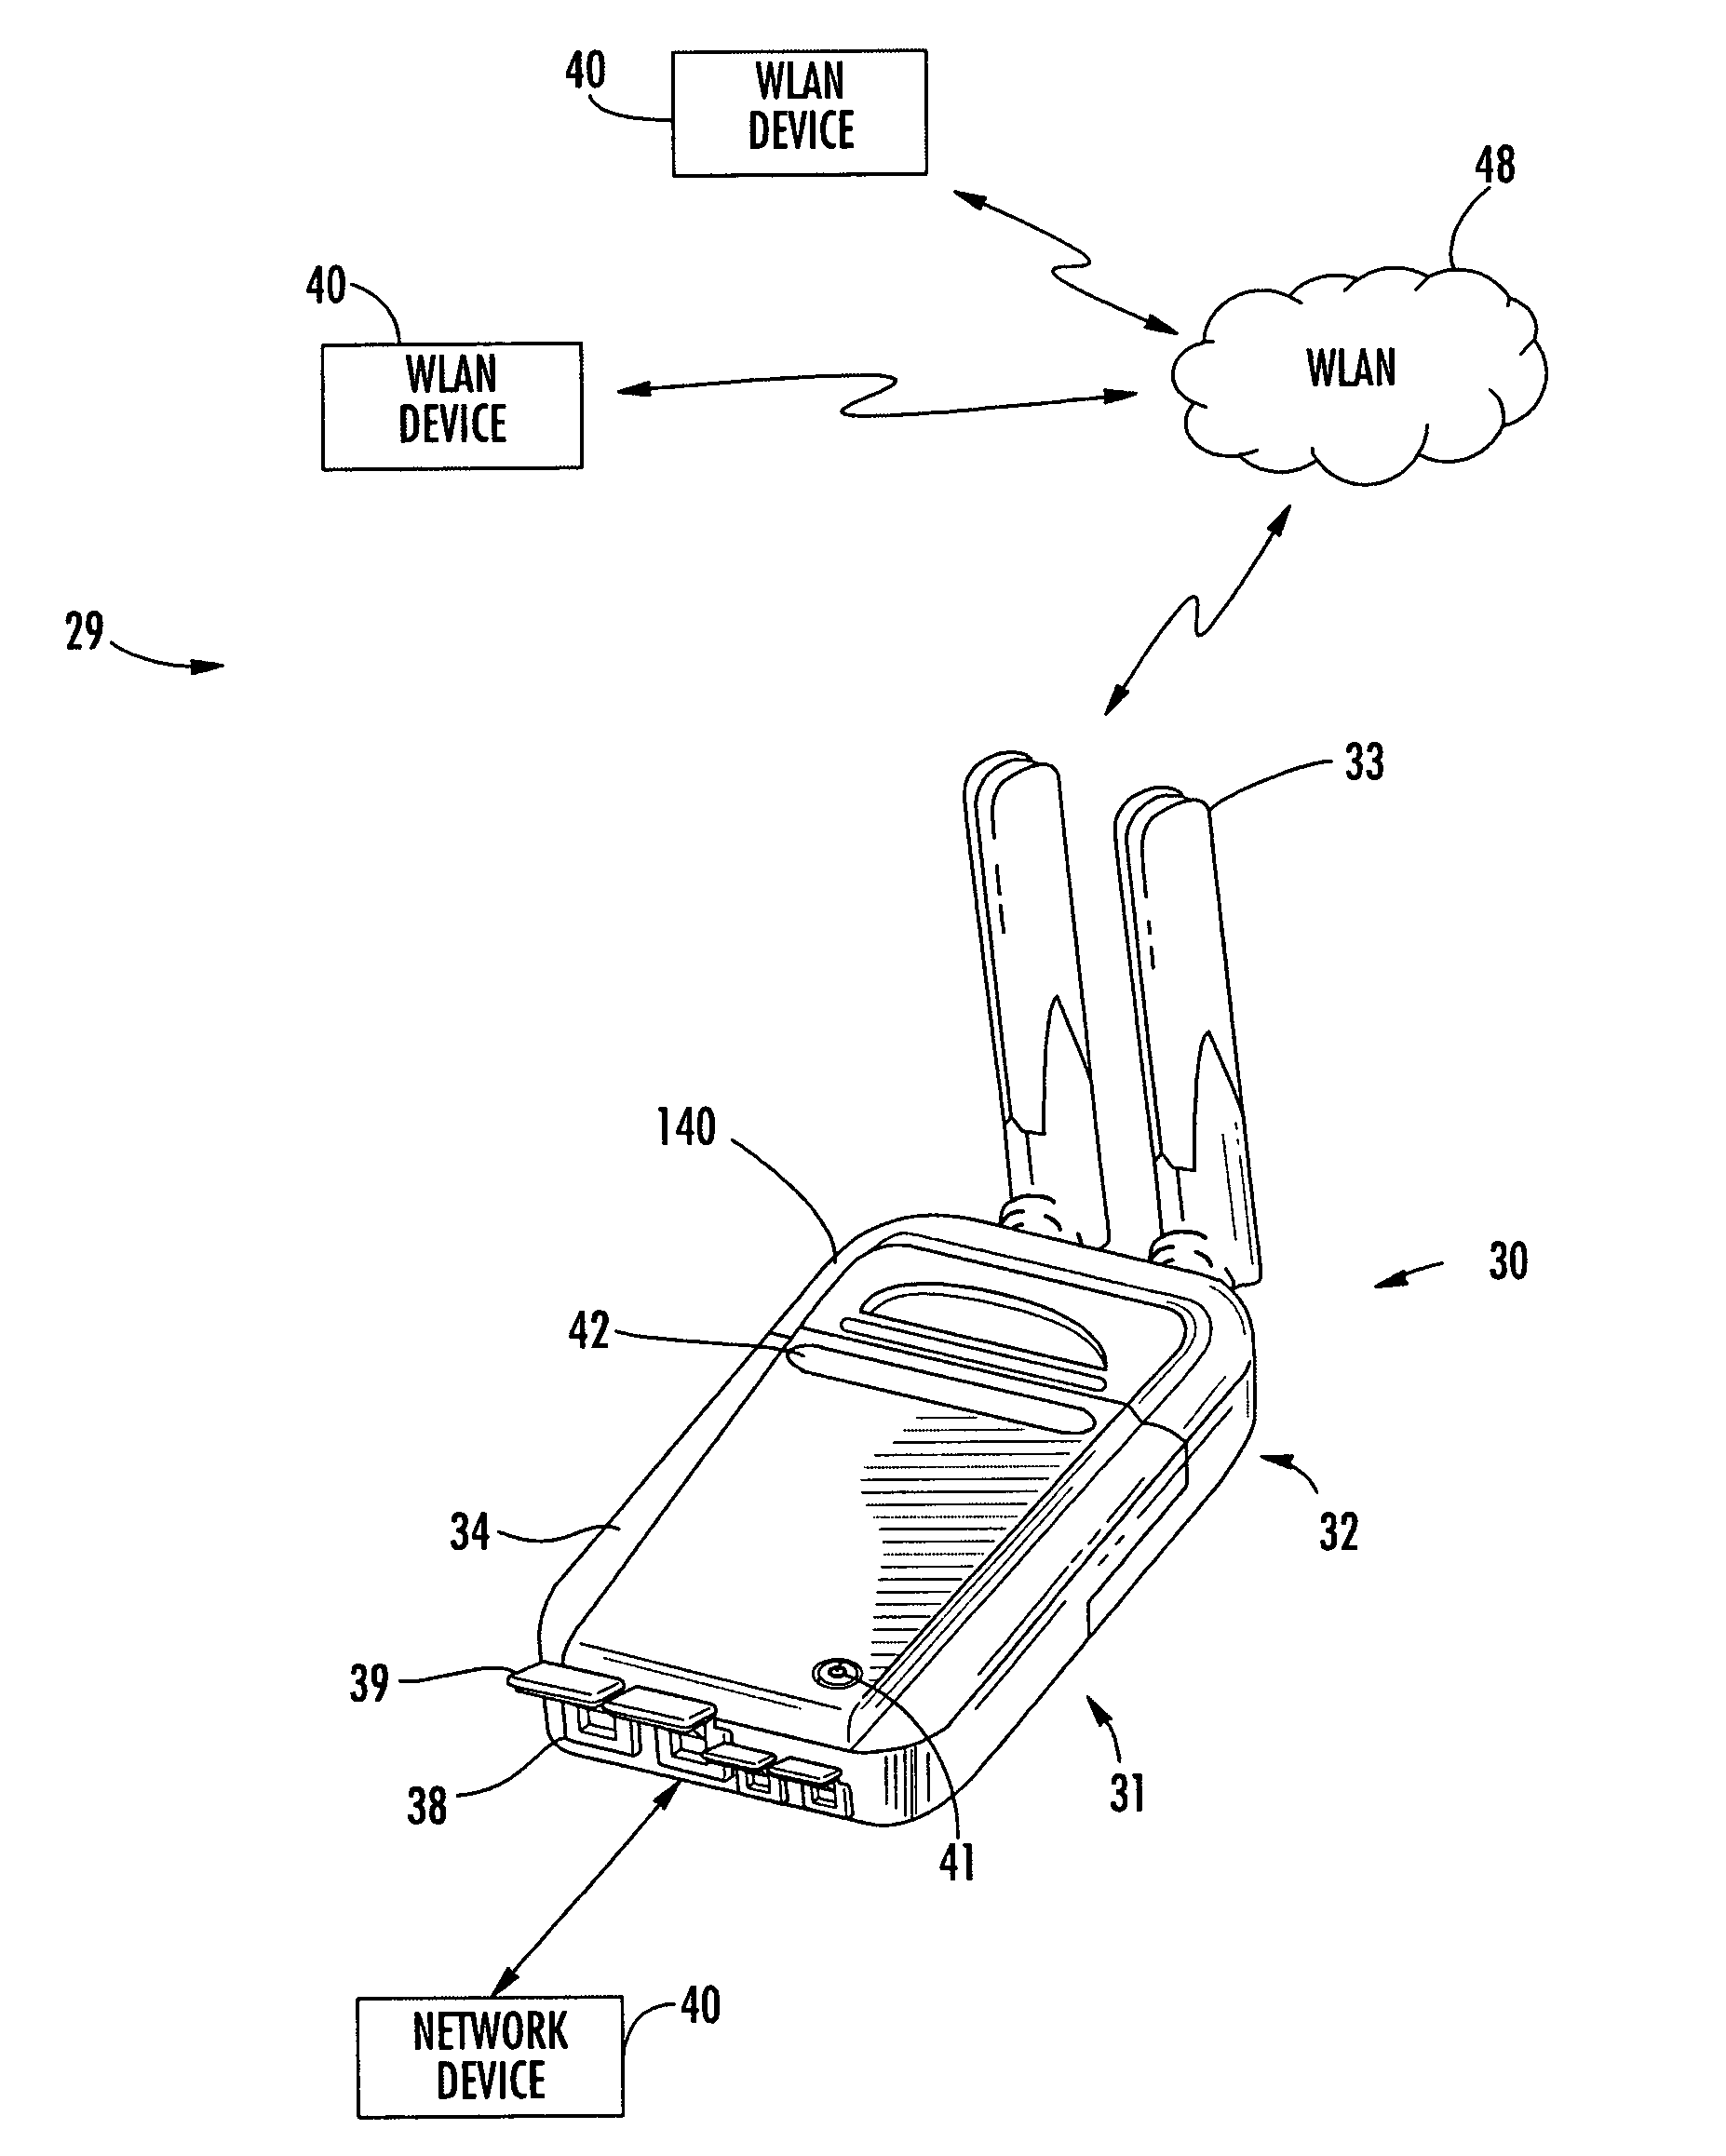 Modular cryptographic device and related methods